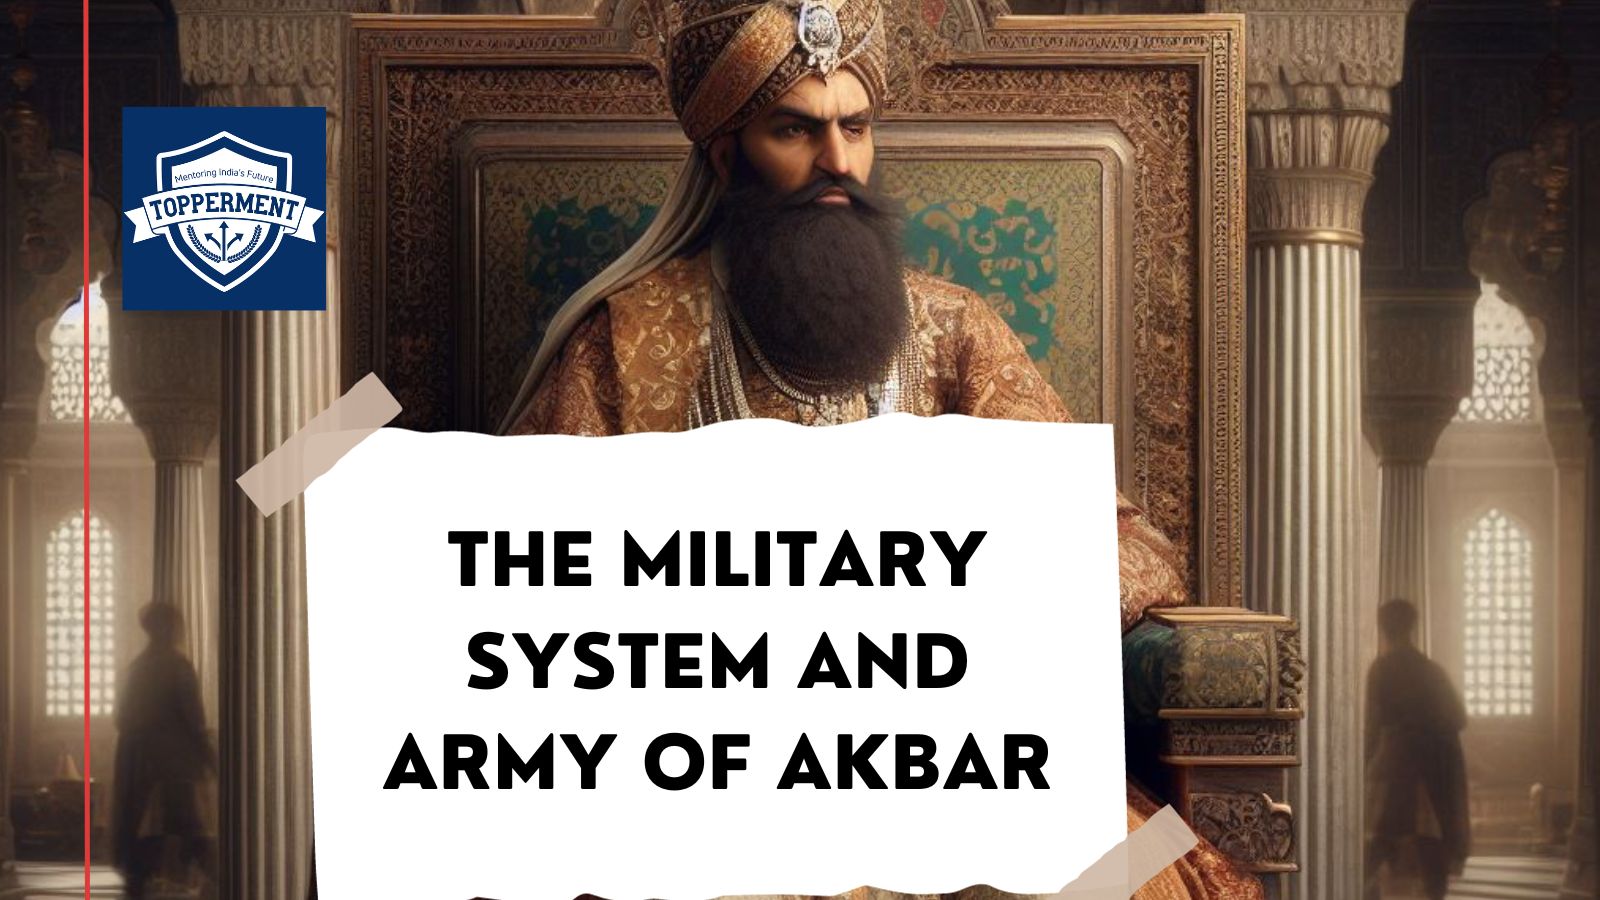 The-Military-System-and-Army-of-Akbar-Best-UPSC-IAS-Coaching-For-Mentorship-And-Guidance